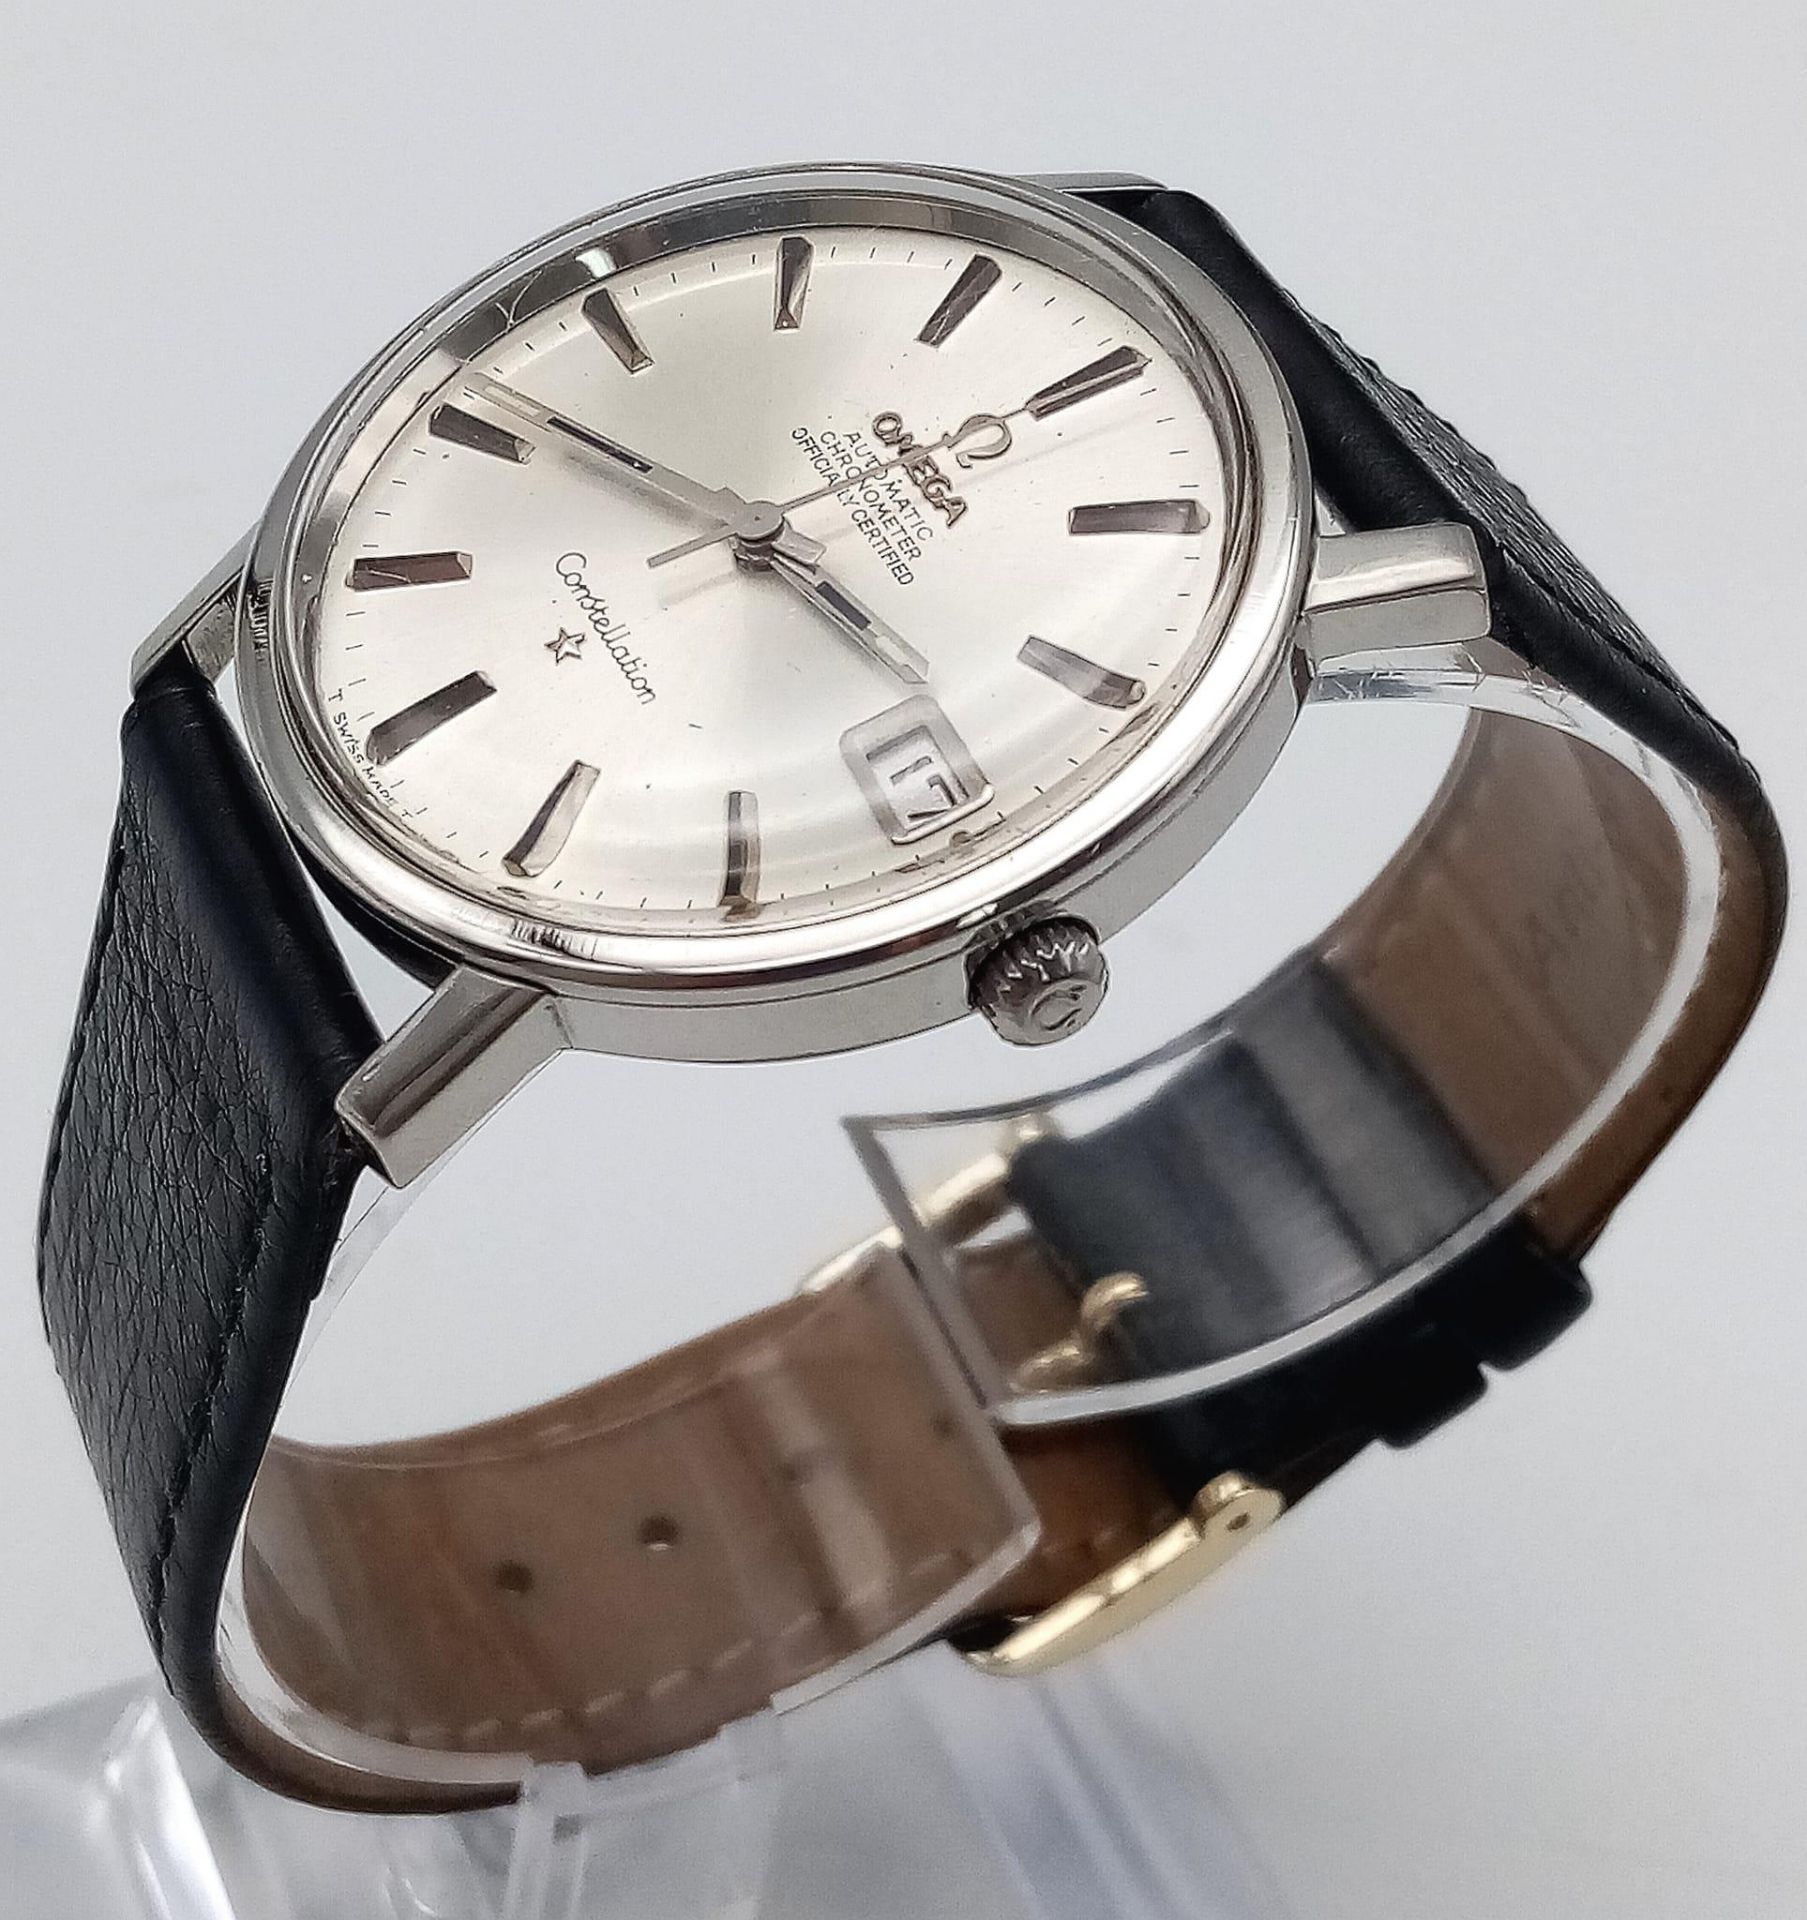 Omega Constellation Chronometer Men's Watch. Automatic movement, leather strap, 32mm dial. Circa - Image 4 of 13